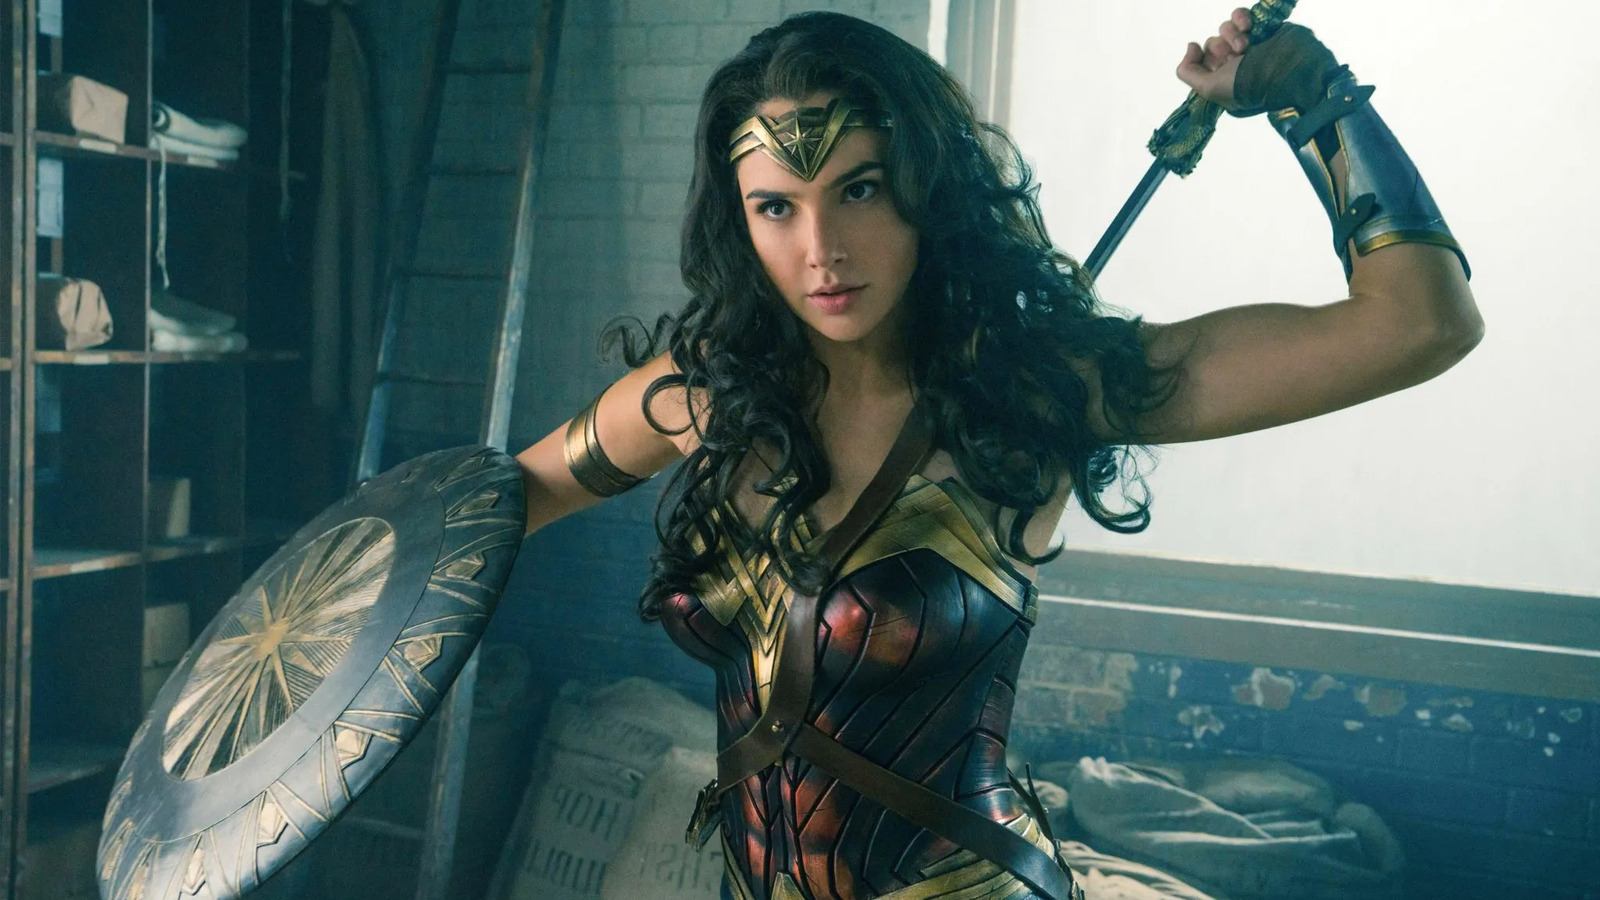 Wonder Woman 3 and Spin-off Statuses Currently Uncertain Says Patty Jenkins